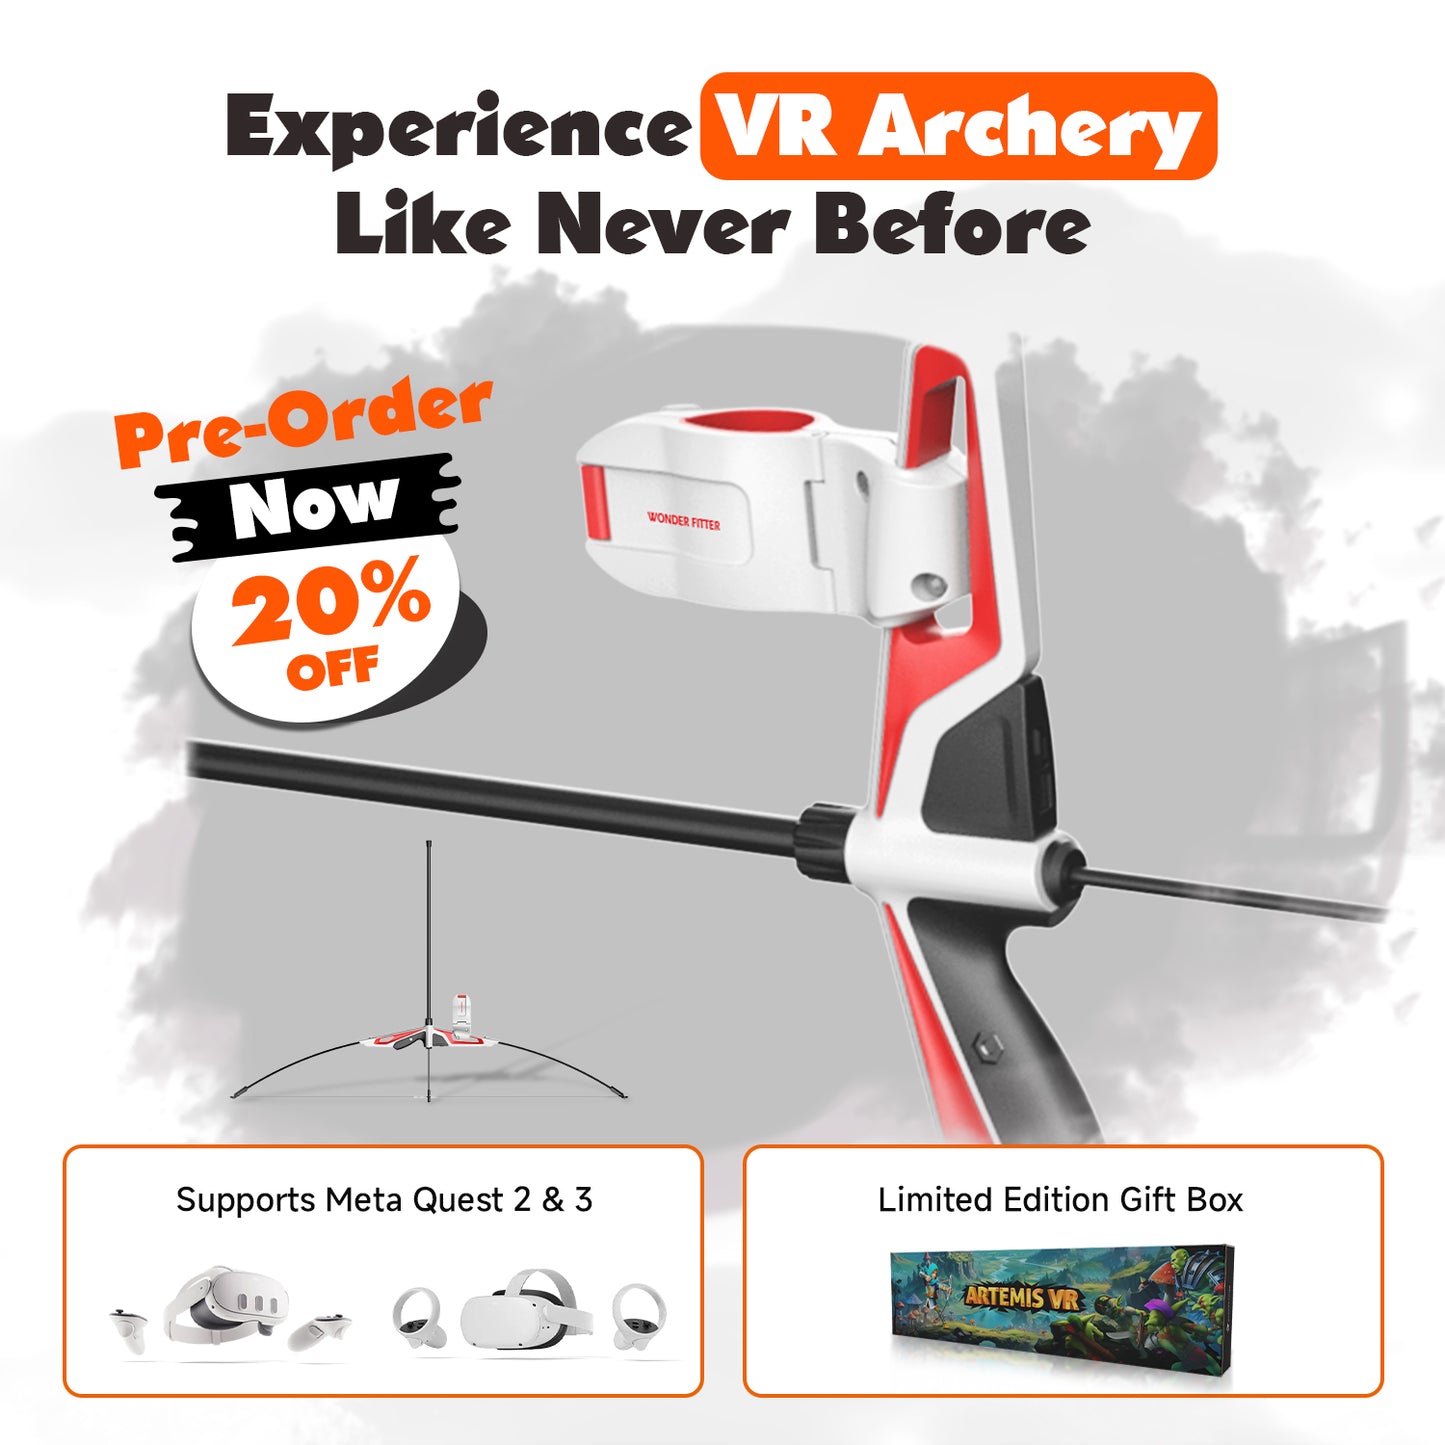 Artemis VR Game Bow: Ultimate VR Archery Experience